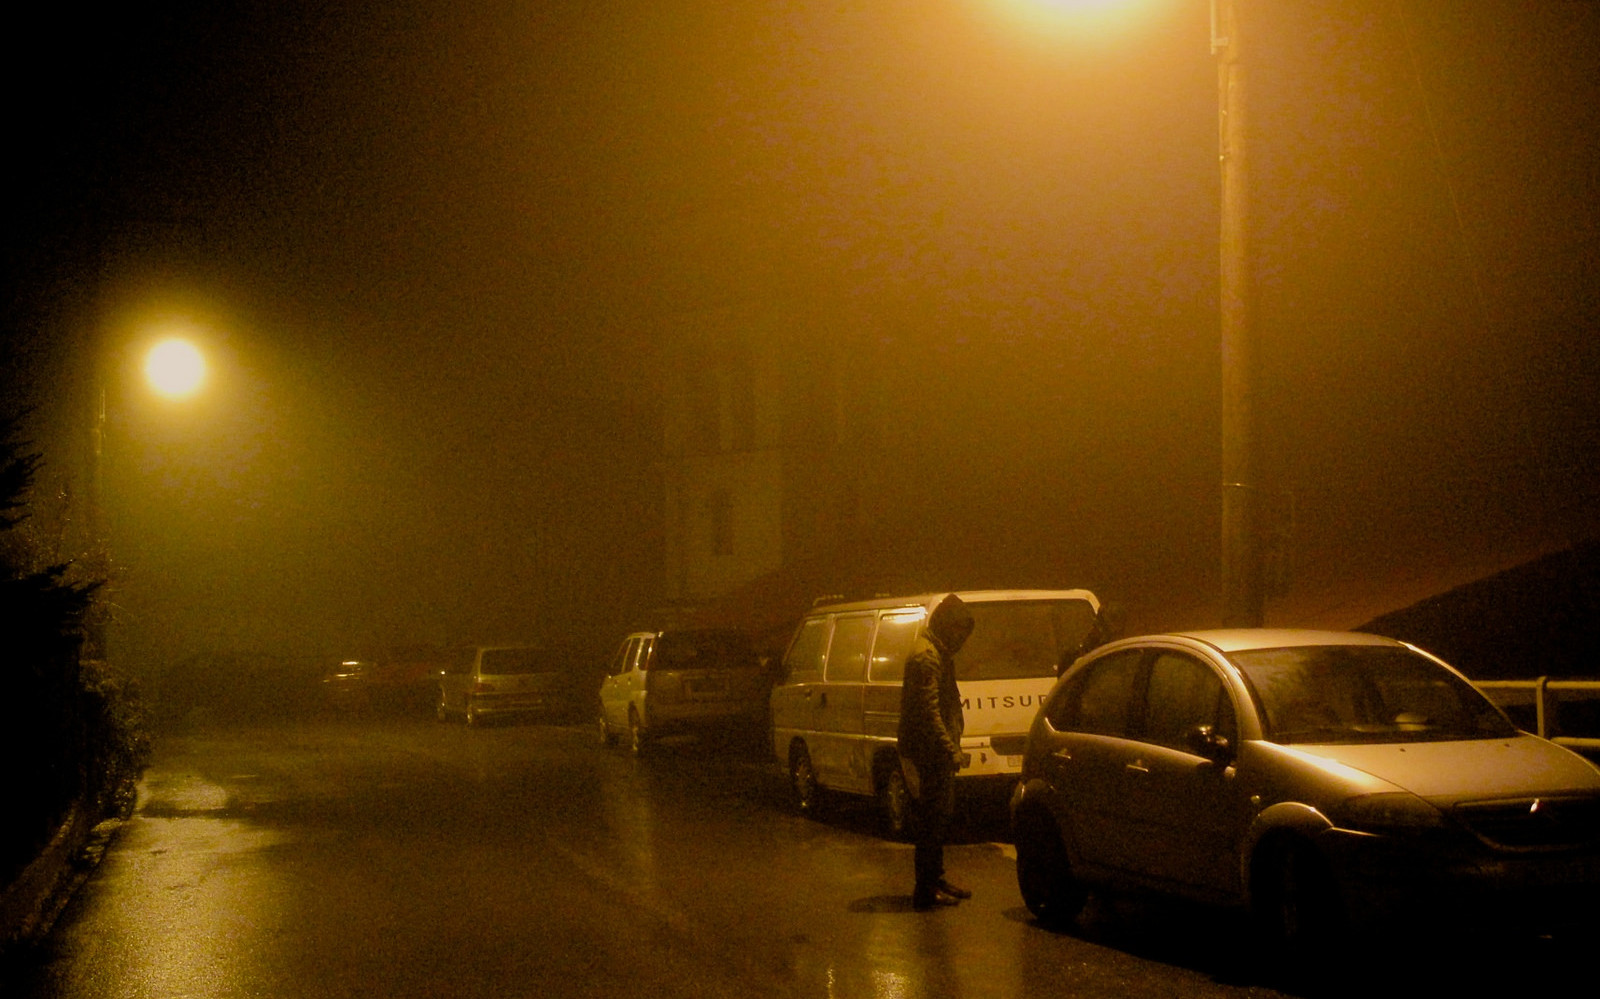 Image: A foggy/rainy city street with hooded individuals around a car.